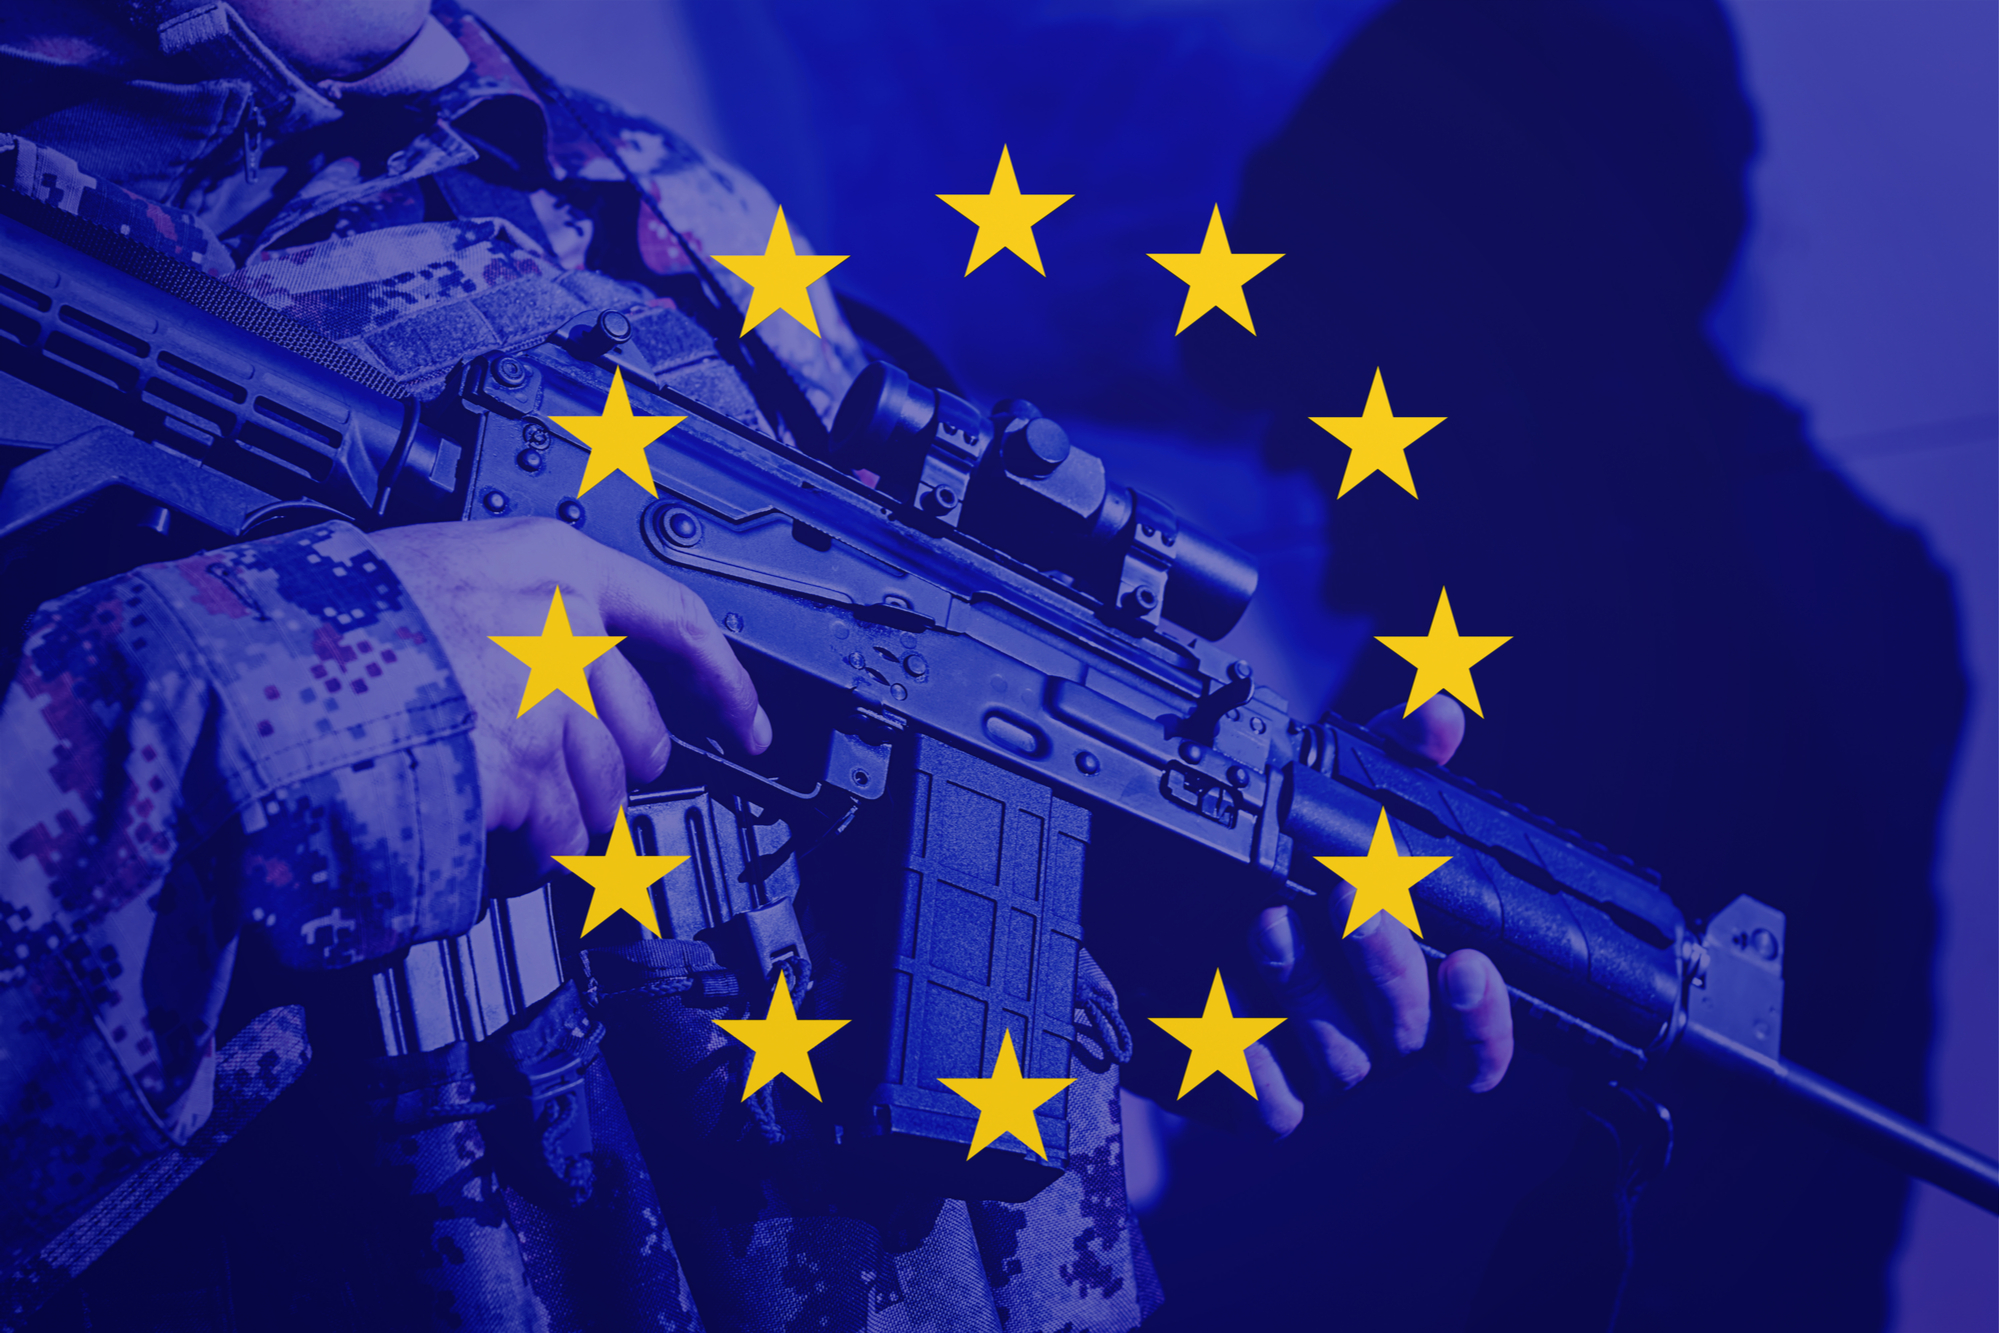 Collective EU military force